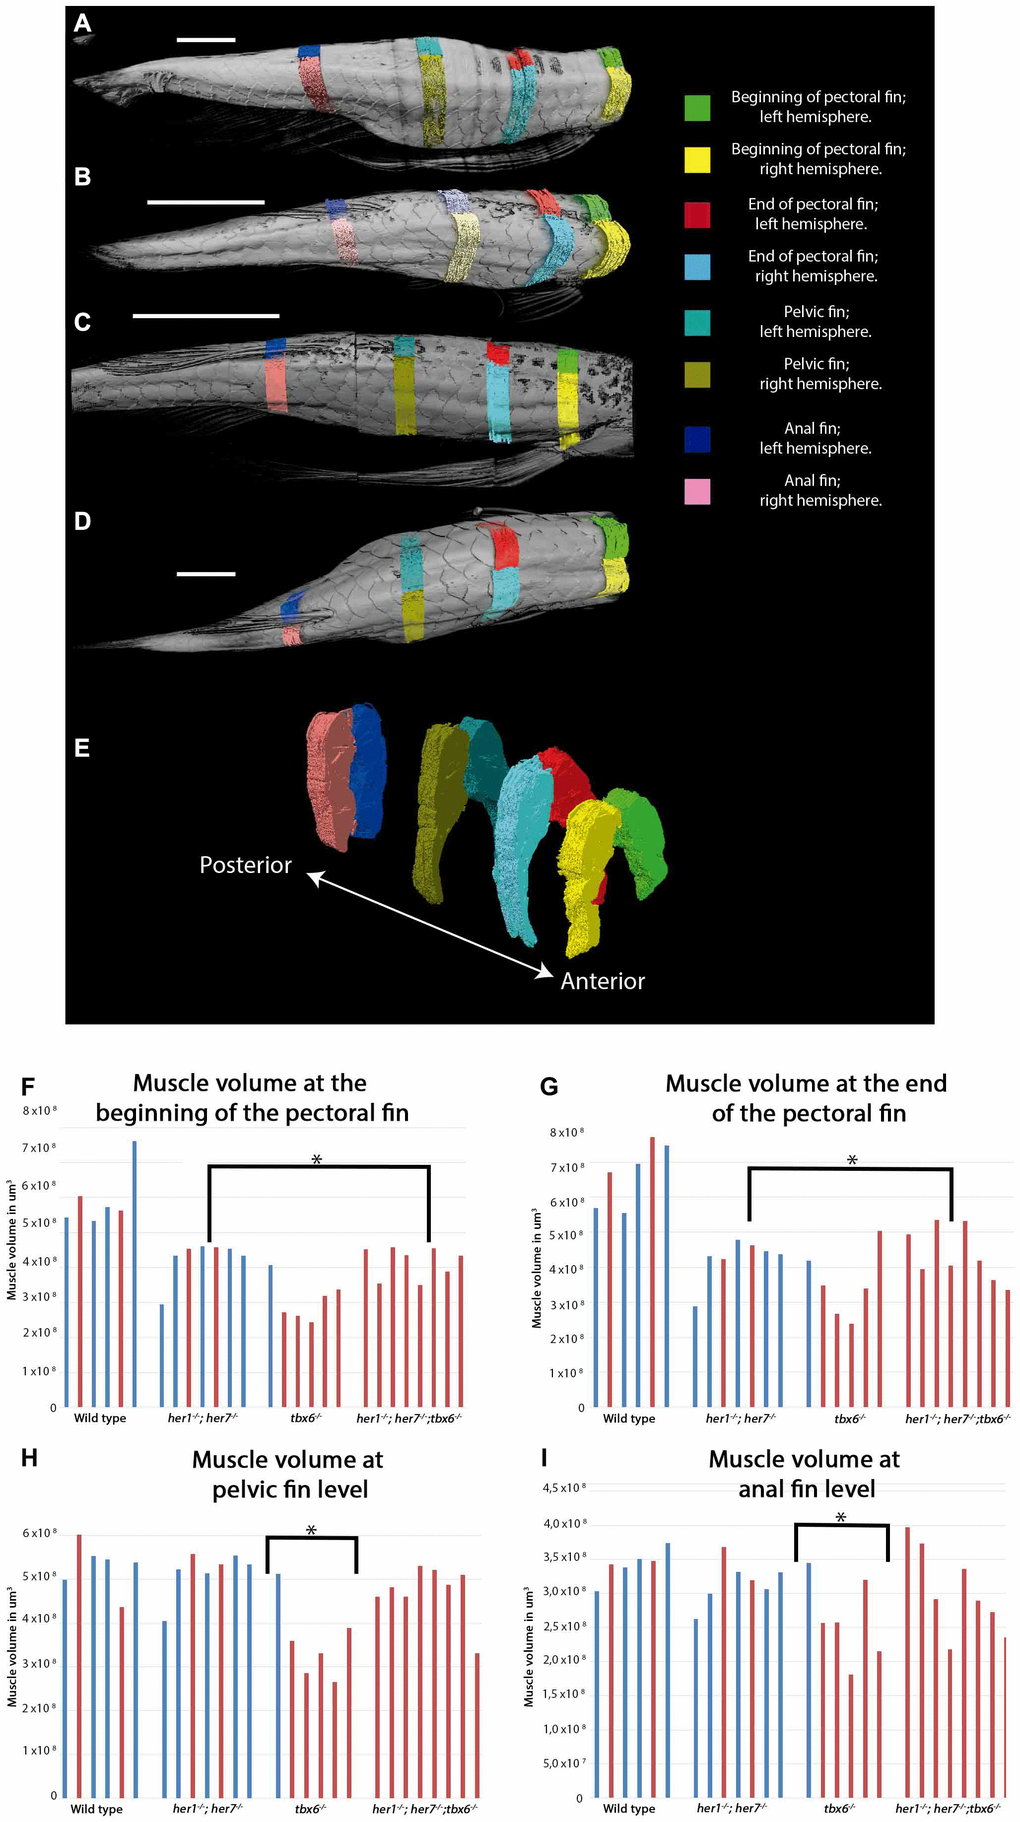 Muscle volume is affected in mutants at adult stages. (A–D) Representative micro CT images showing the dorsal view of fish used for the segmentation of muscles into the left and right side at the four key areas (indicated by the colored regions) in the 4 different groups: (A) wild type, (B) tbx6-/- (C) her1-/-;her7-/-, and (D) her1-/-;her7-/-;tbx6-/-. (E) Lateral view of reconstructed surface generation of the individual muscle from the WT. (F–I) graphical results of the volume measurements for every area. (F) Muscle volume at the beginning of the pectoral fin. (G) Muscle volume at the end of the pectoral fin. (H) Muscle volume at pelvic fin level. (I) Muscle volume at anal fin level. An asterisk denotes a statistically significant difference between wild type and mutant groups (two tailed significant test P=0,05). Individuals that presented scoliosis during the course of the experiment (represented with red bars) tend to have the same muscle volume as their phenotypically normal siblings (represented with blue bars). The three mutants analyzed have less muscle volume at the first two anterior positions. The muscle of 27 out of 32 individuals could be analyzed to 12 months, because two wild type fish (1 with scoliosis and 1 without scoliosis), one her1-/-; her7-/- individual (with scoliosis) and two tbx6-/- individuals (both with scoliosis) had to be euthanized between 9 months and one year. After the individual was removed, it was not stained for muscle analysis and therefore will not appear in the graph.